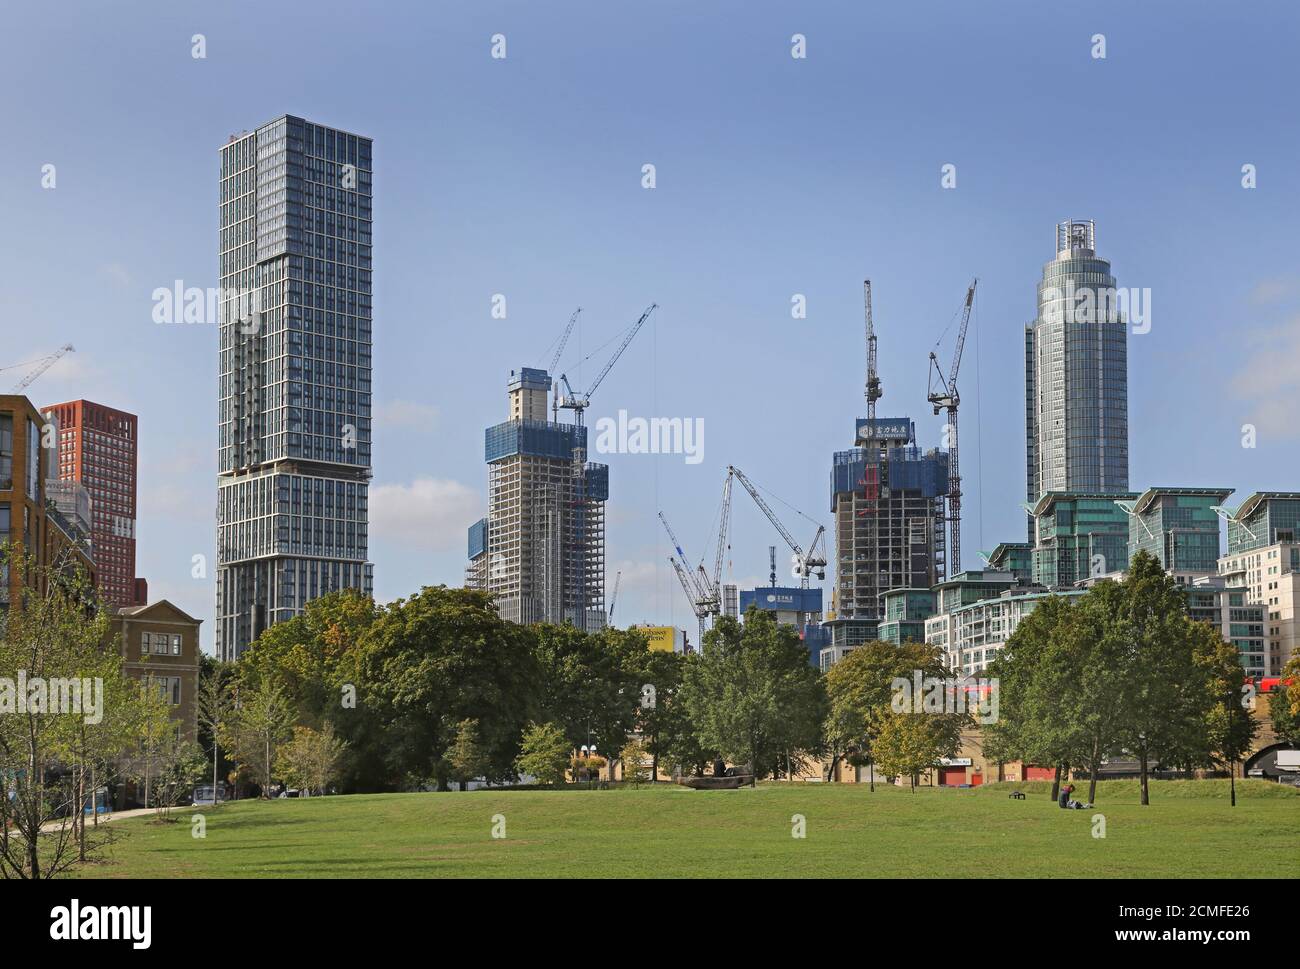 New apartment blocks rise above Spring Gardens in London's Vauxhall district. Redevelopment due to the new US Embassy and a new tube line extension. Stock Photo